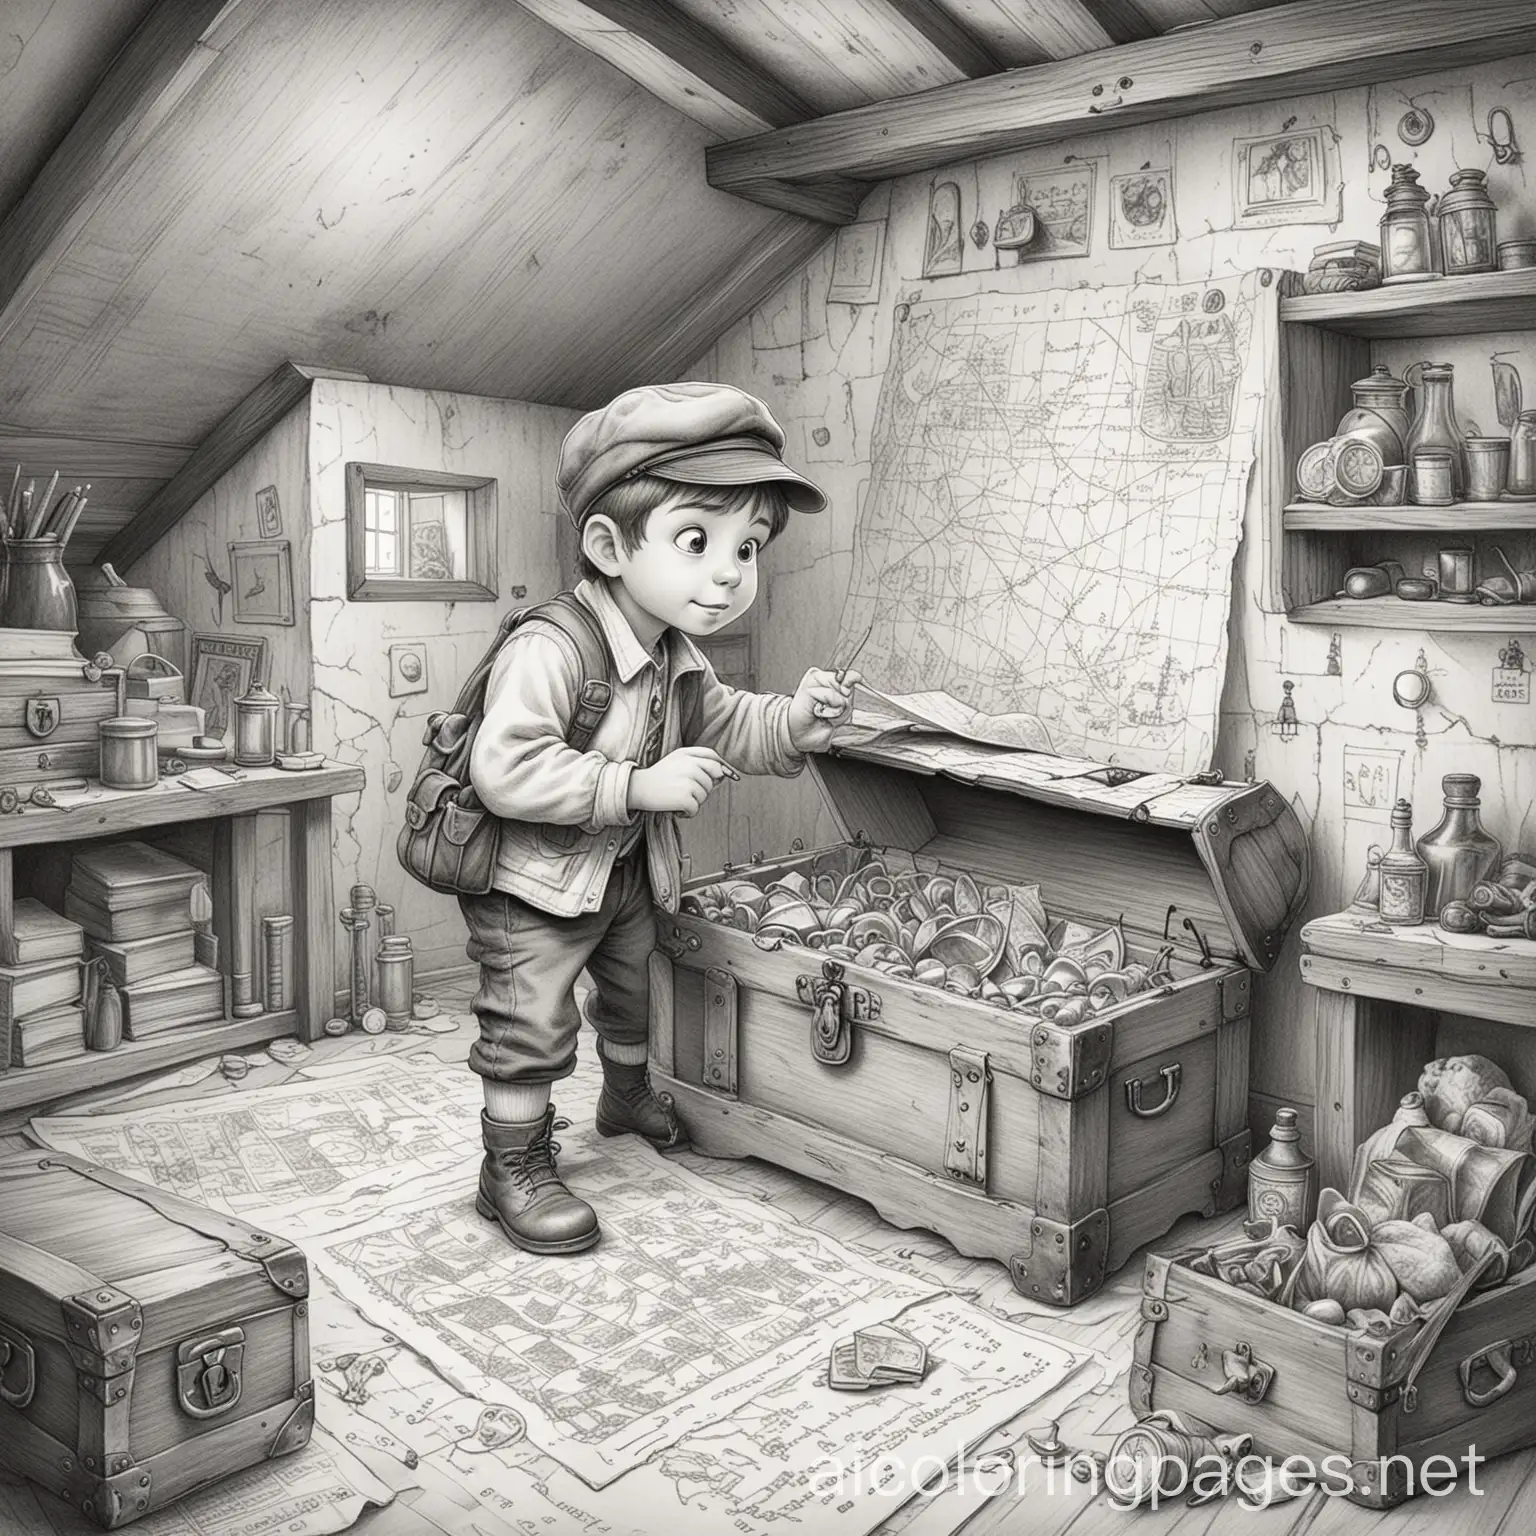 Lightly sketch the layout of the entire scene with a pencil. Place the main elements: the kid detective in the centre, the treasure map in their hands, the old chest in front of them, and the attic setting around them., Coloring Page, black and white, line art, white background, Simplicity, Ample White Space. The background of the coloring page is plain white to make it easy for young children to color within the lines. The outlines of all the subjects are easy to distinguish, making it simple for kids to color without too much difficulty